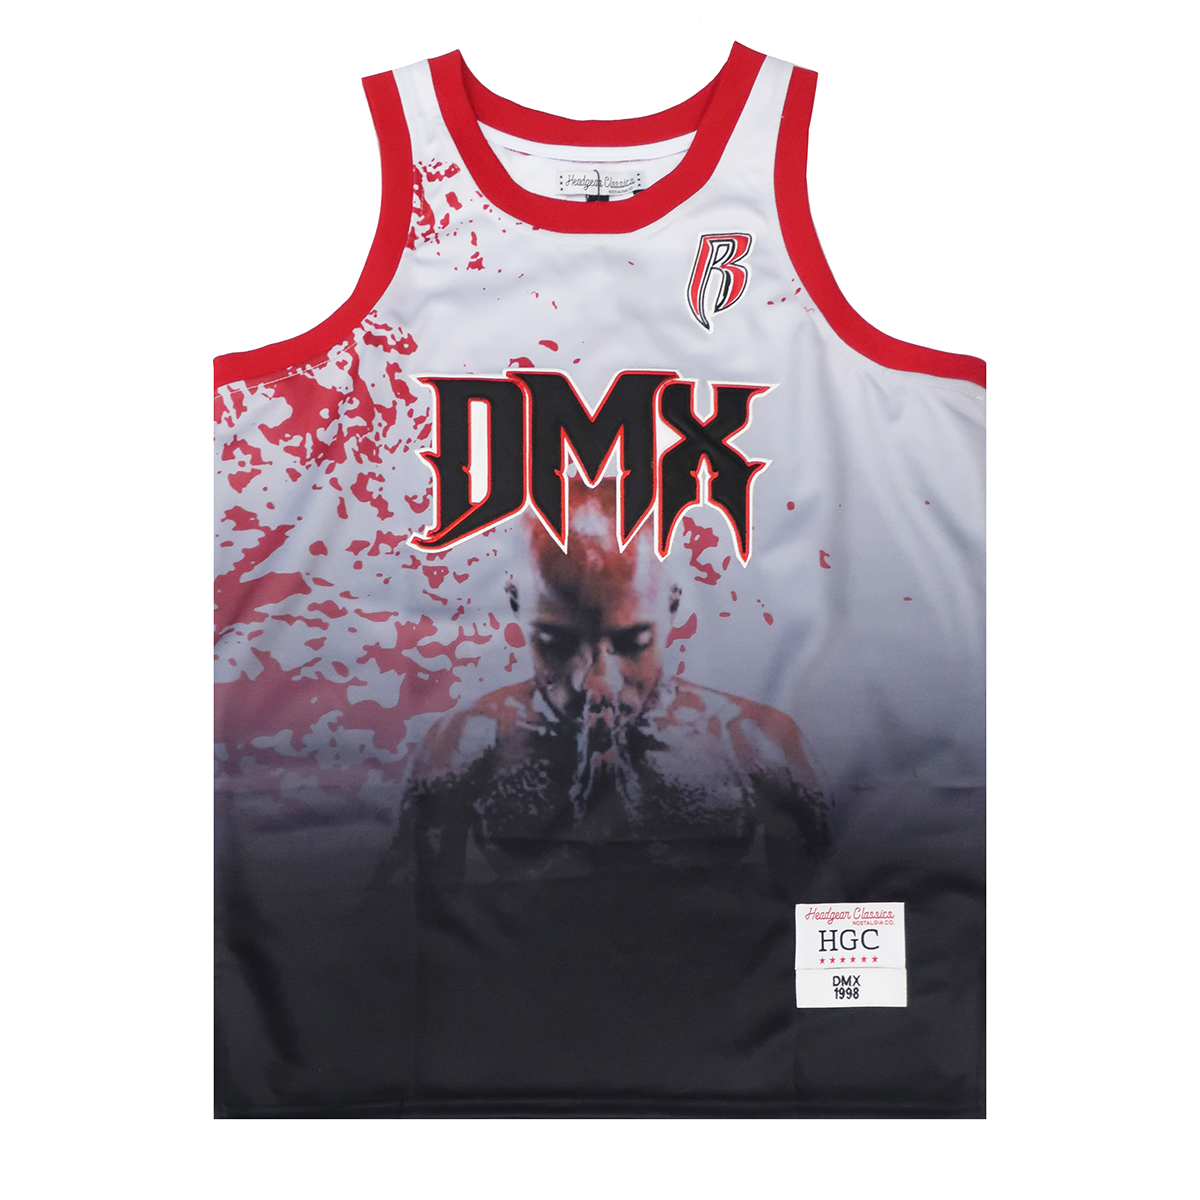 Basketball Clothing for Sale  Buy Cheap Mens Basketball Clothing